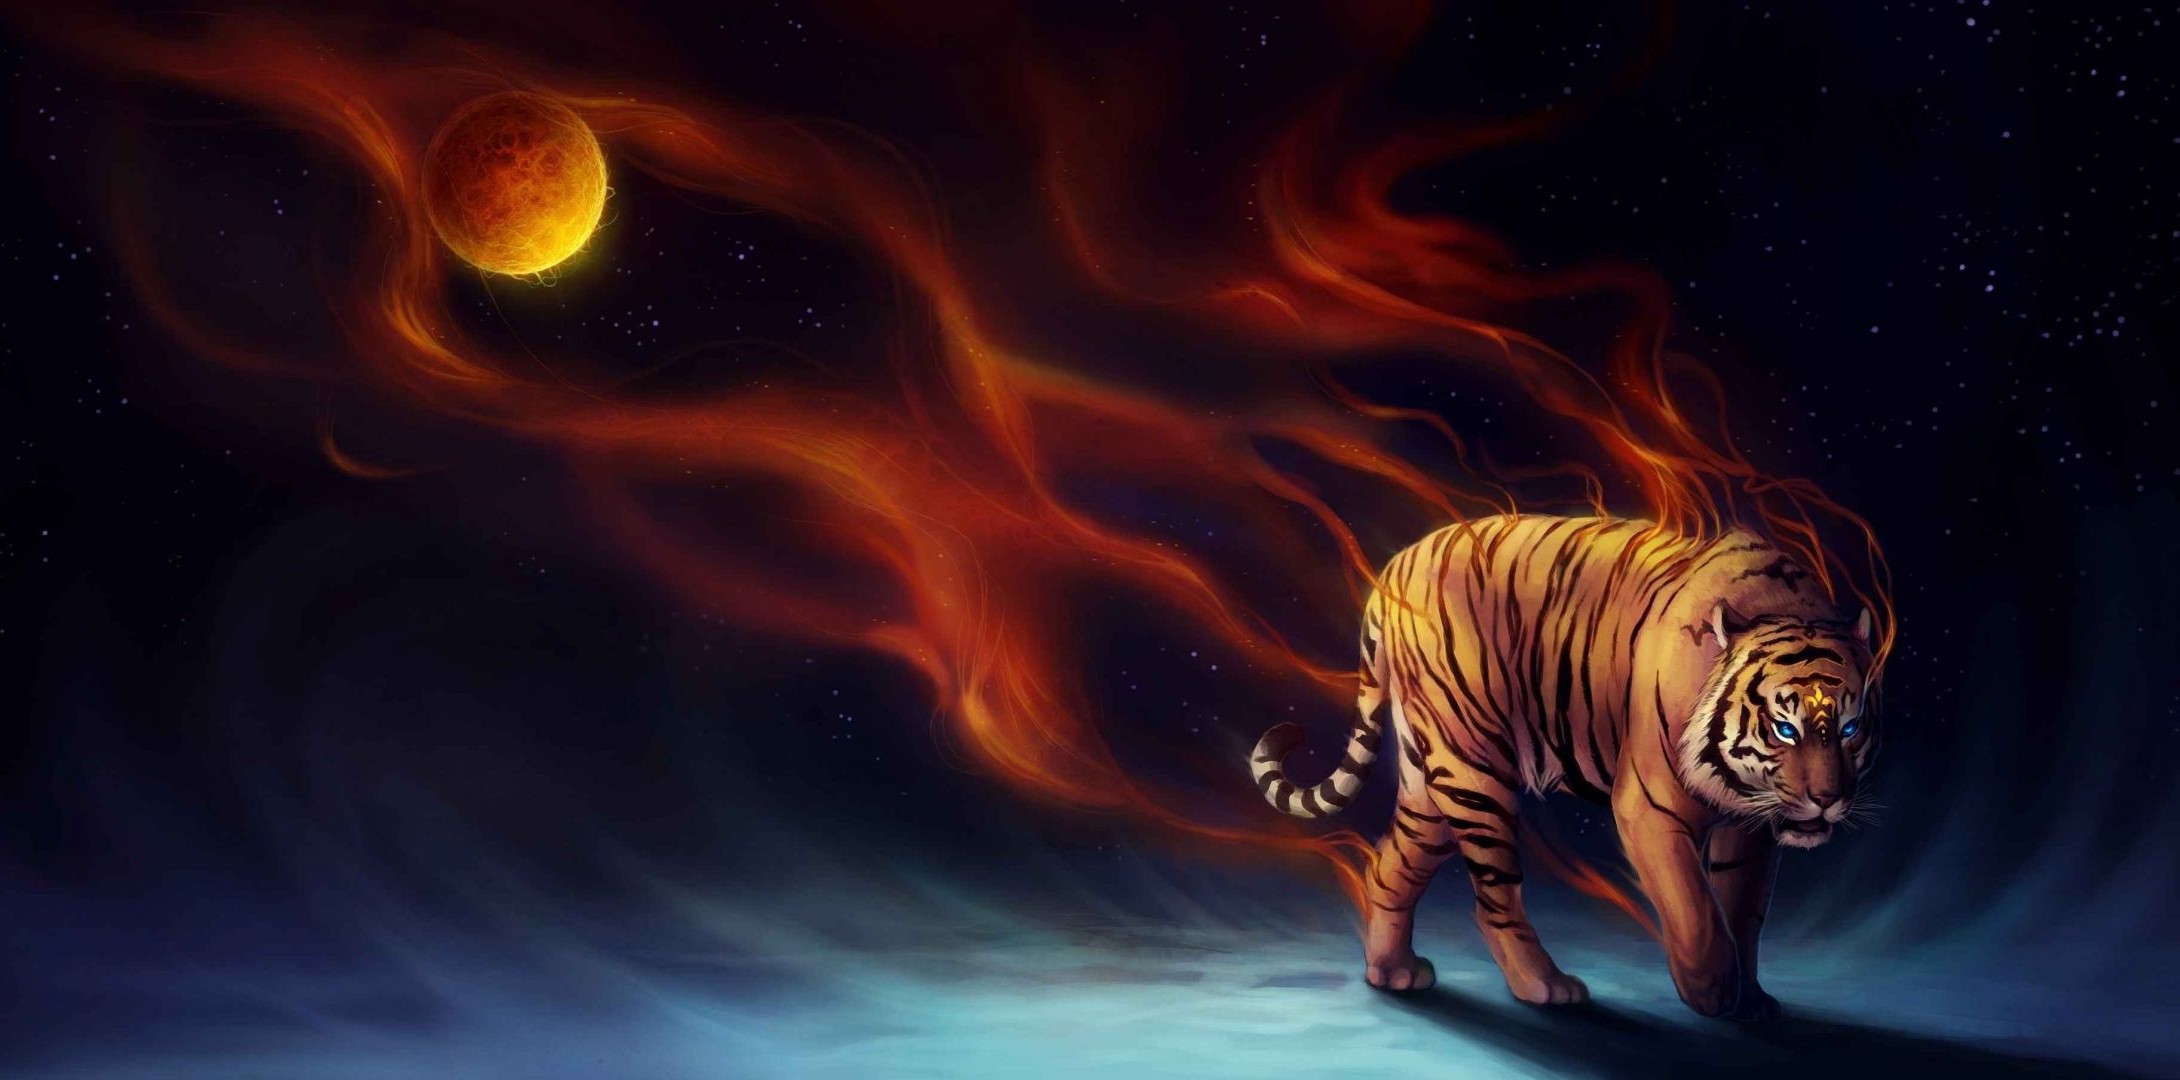 tigers moon flame hot astronomy planet space energy danger science luminescence dark